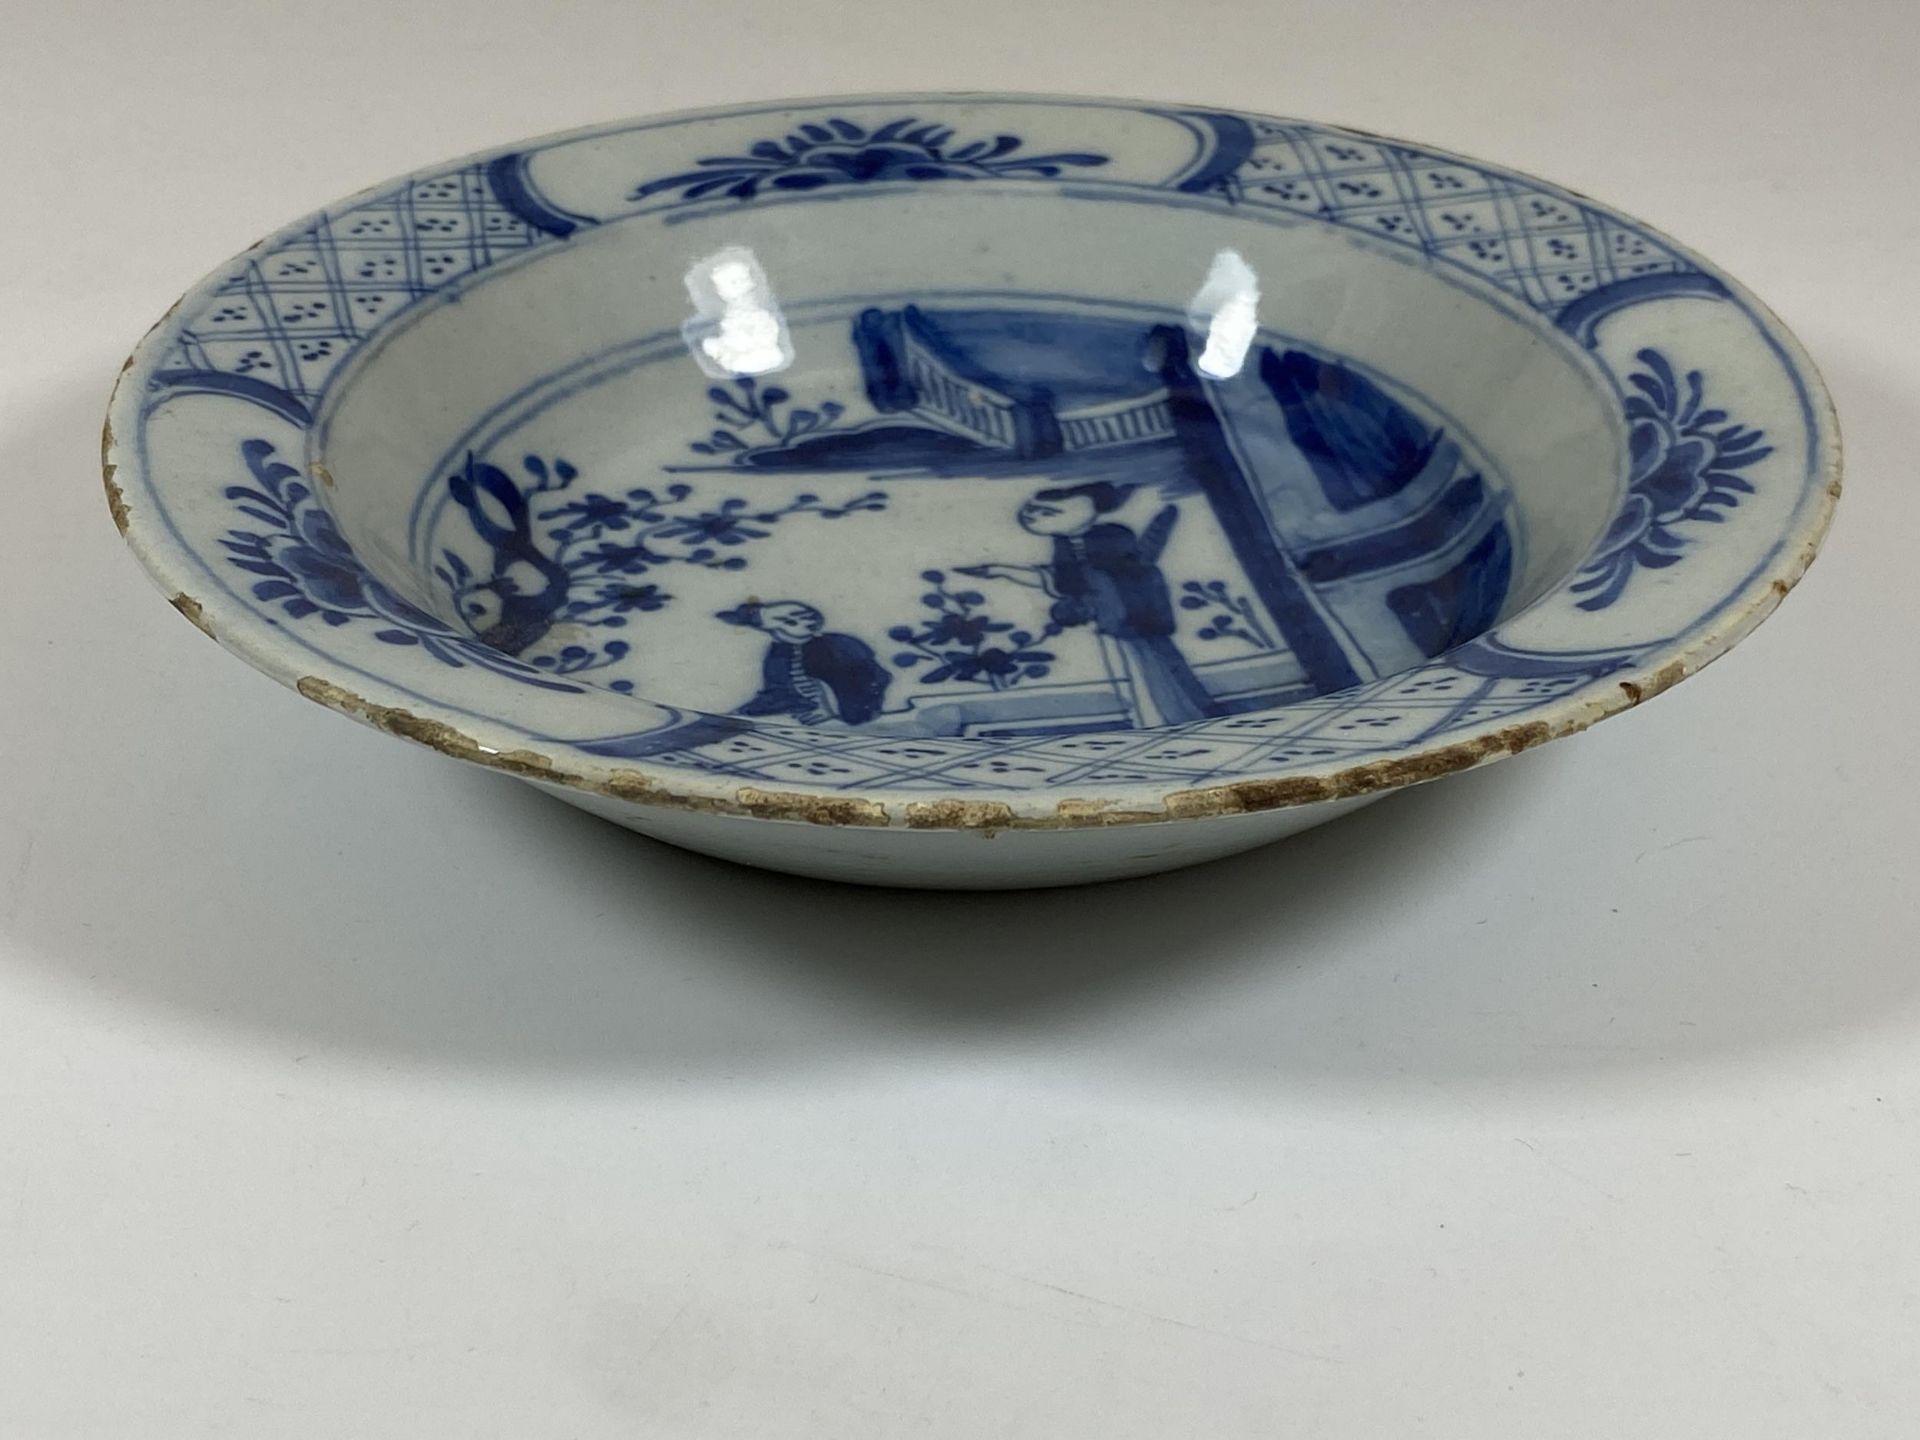 AN EARLY 19TH CENTURY DELFT ORIENTAL DESIGN BLUE AND WHITE PORCELAIN PLATE, DIAMETER 16.5CM - Image 2 of 6